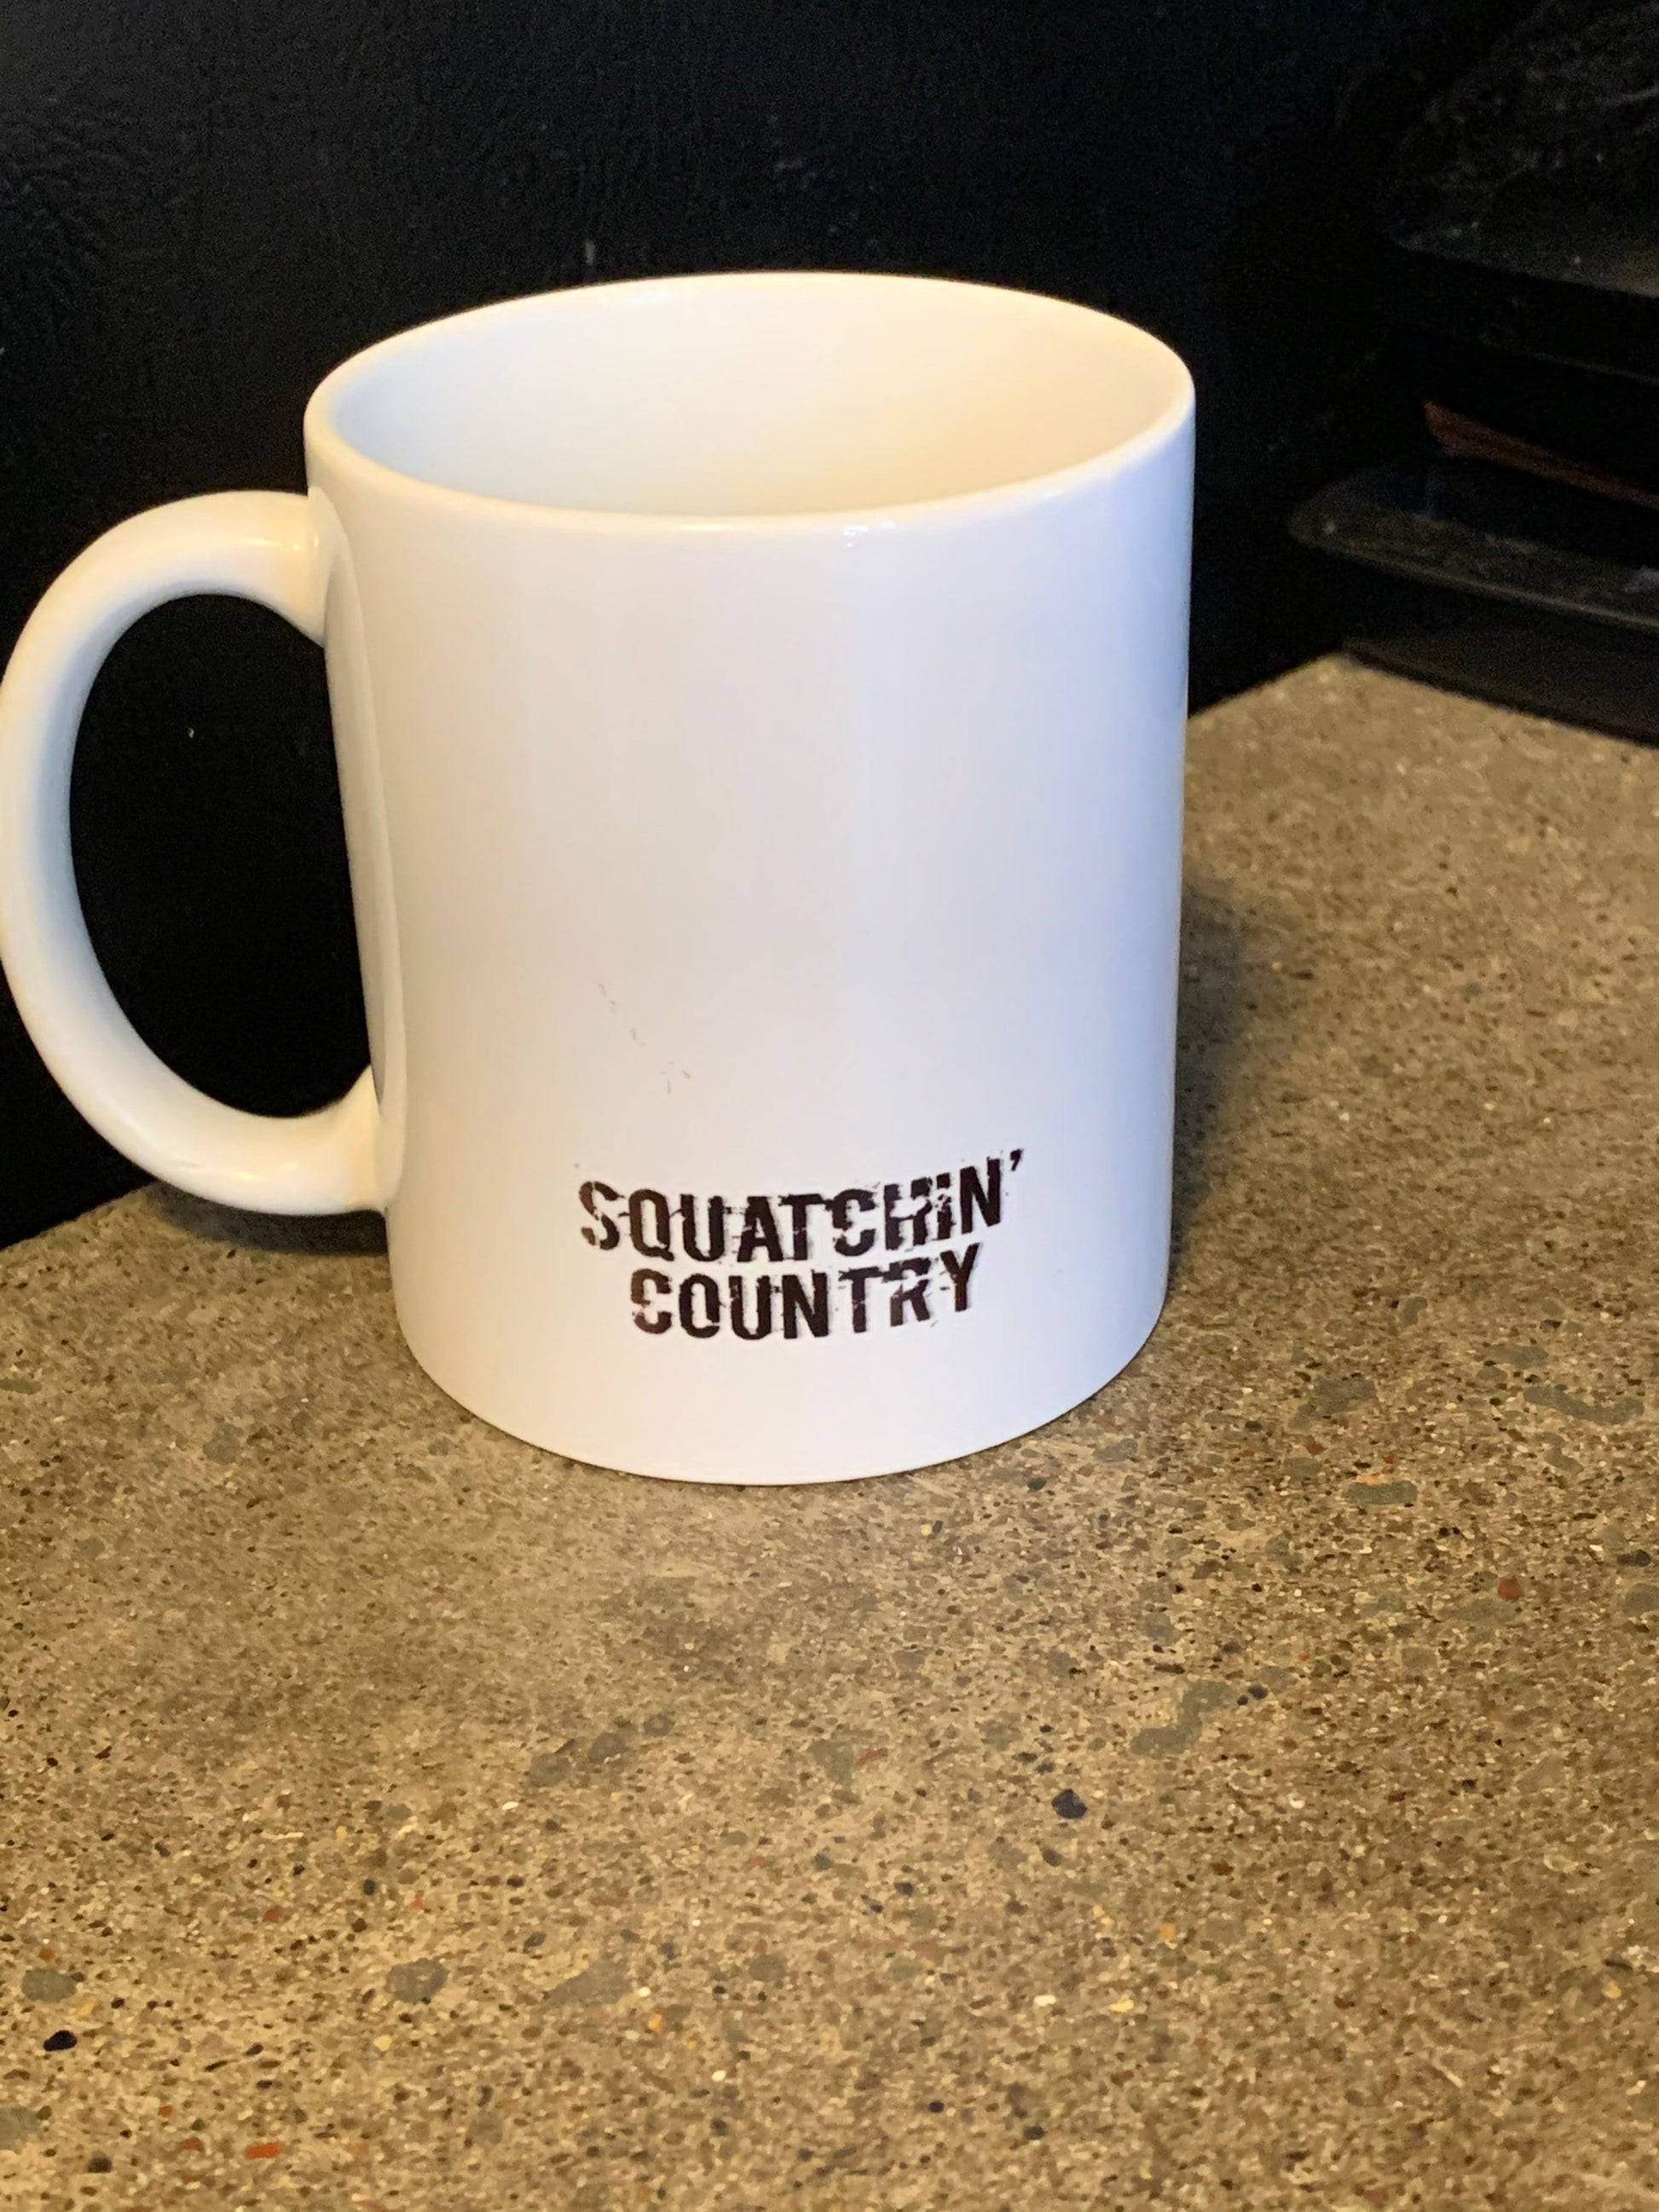 Squatchin' Country funny coffee mug - I liked it better when I couldn't find you